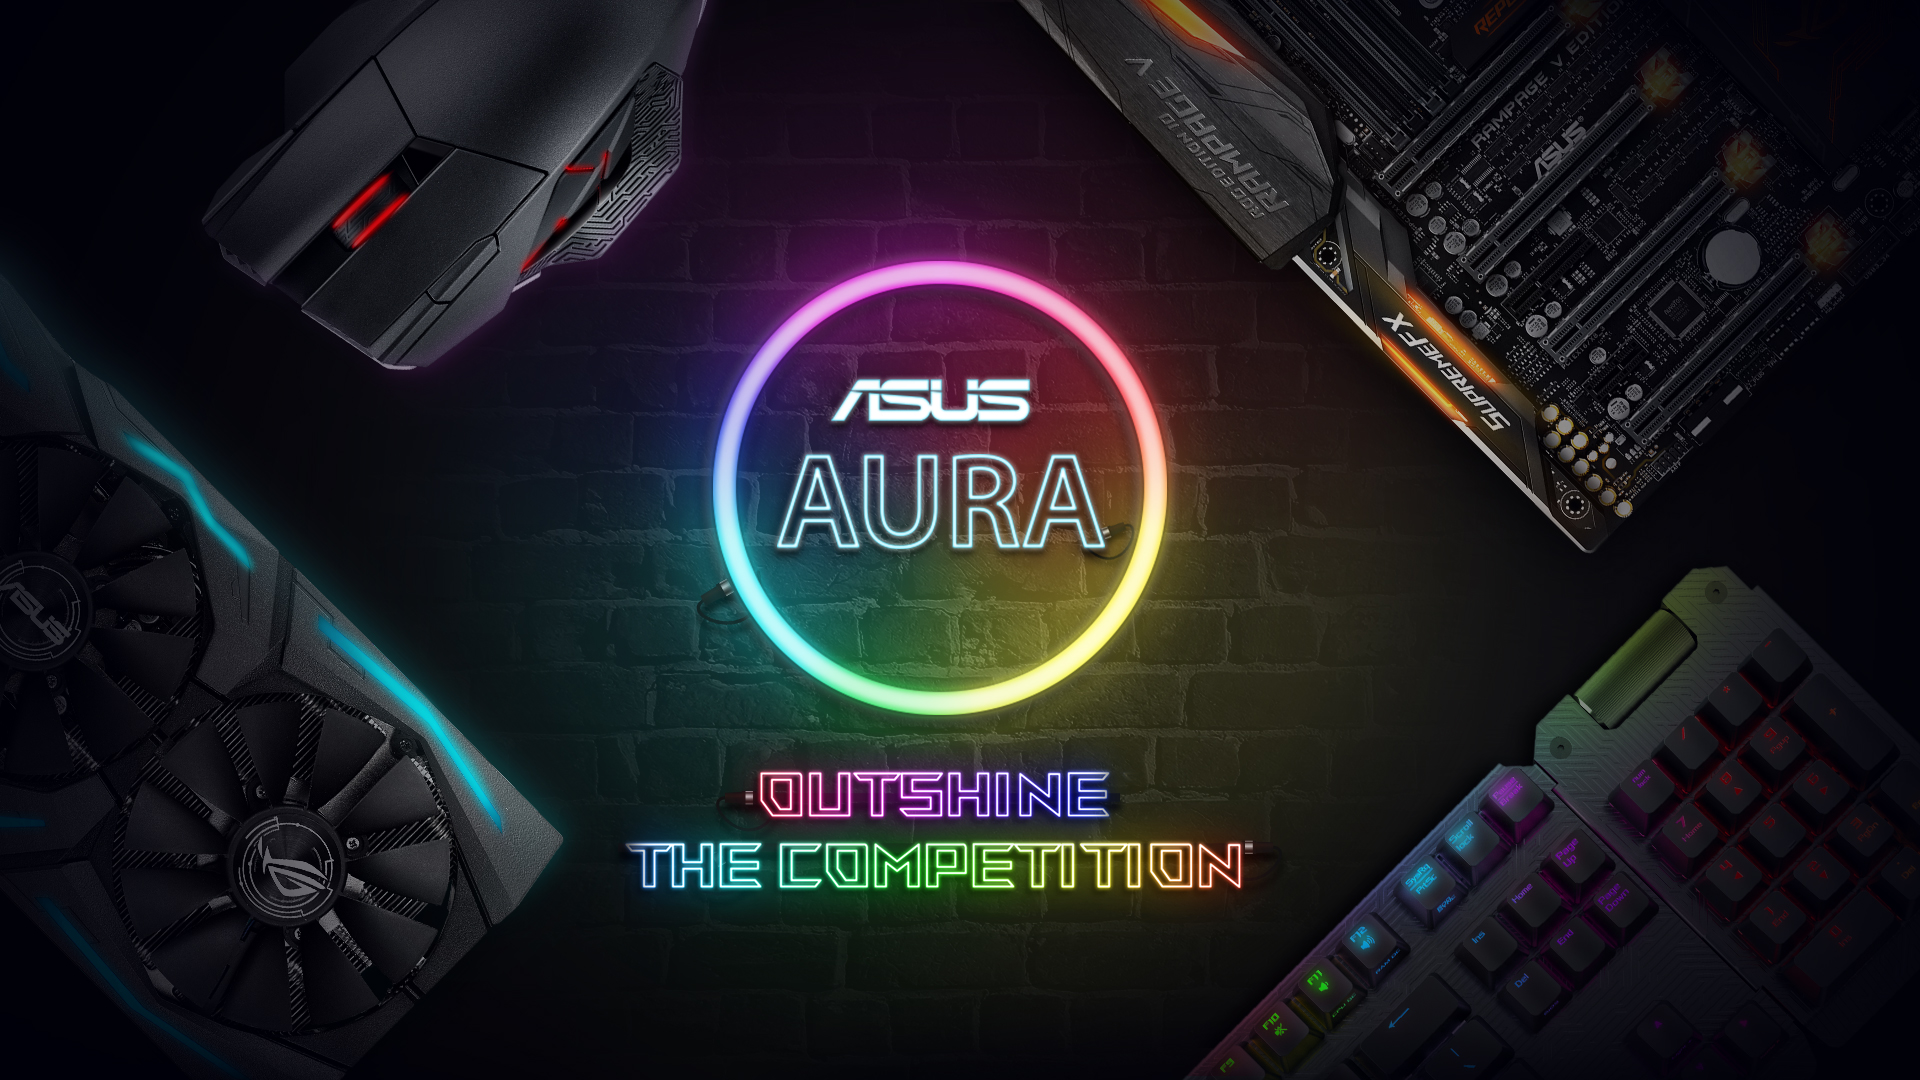 AURA Outshine the competition